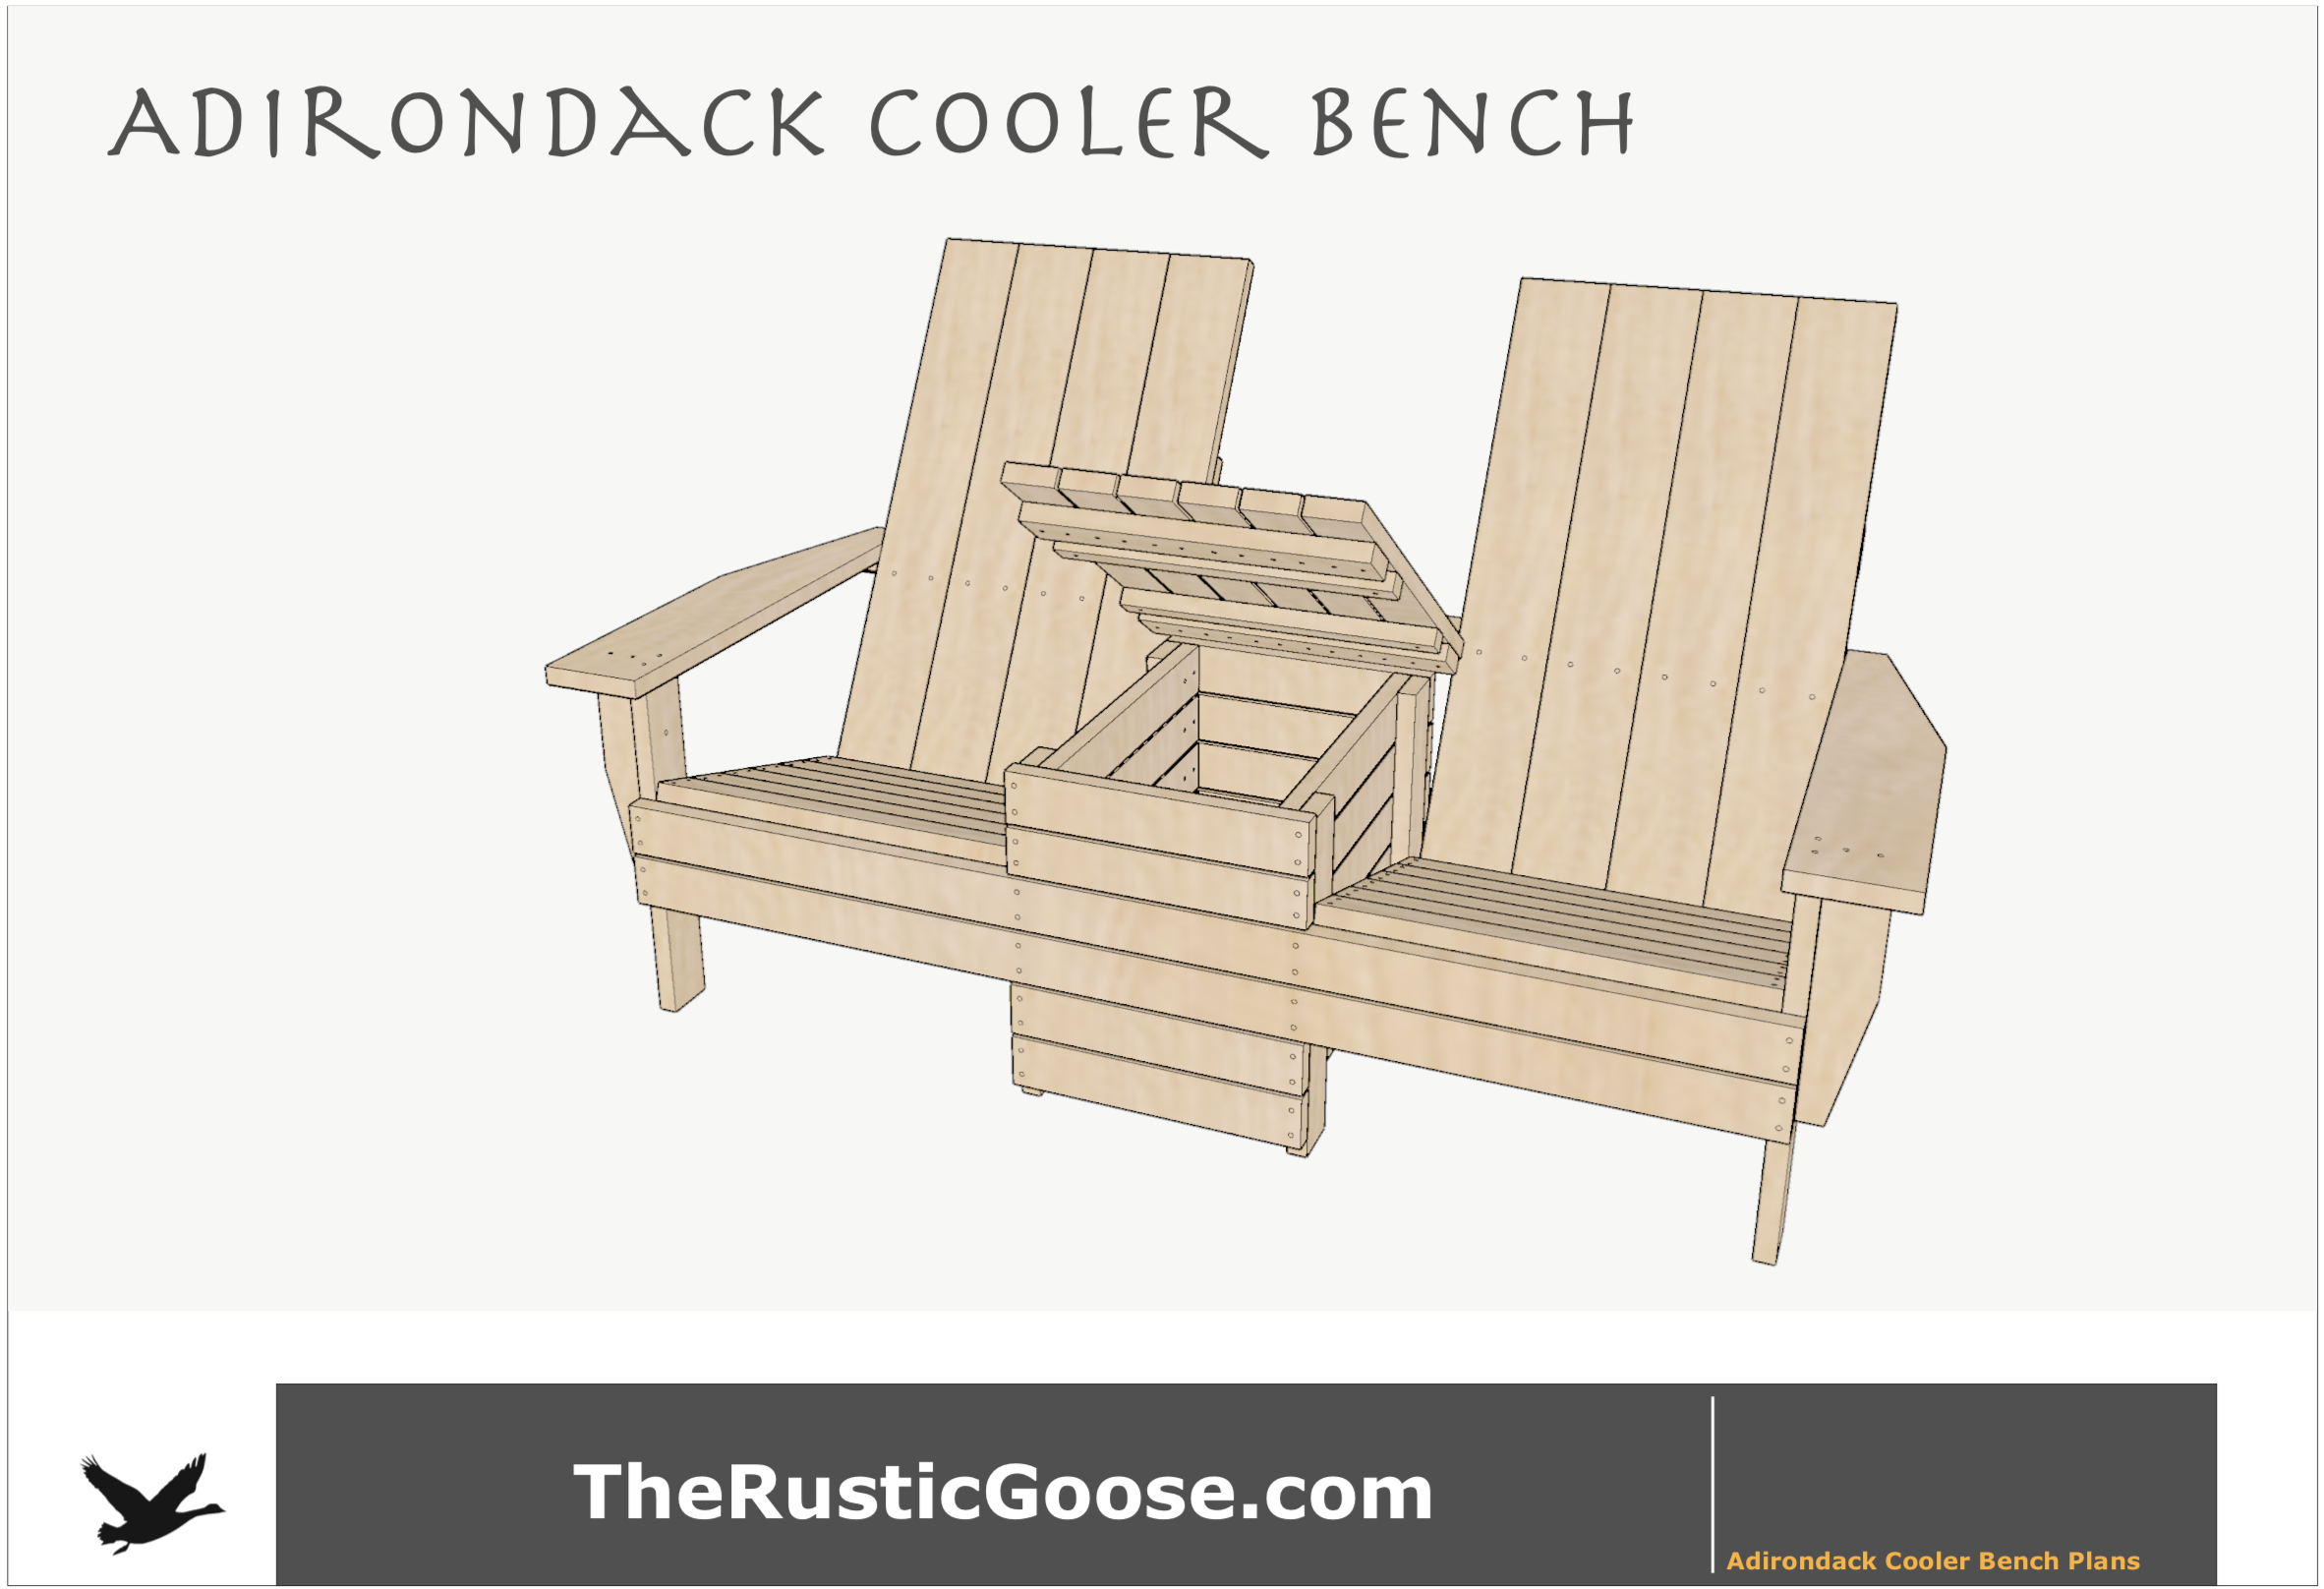 Adirondack Cooler Bench Plans The Rustic Goose